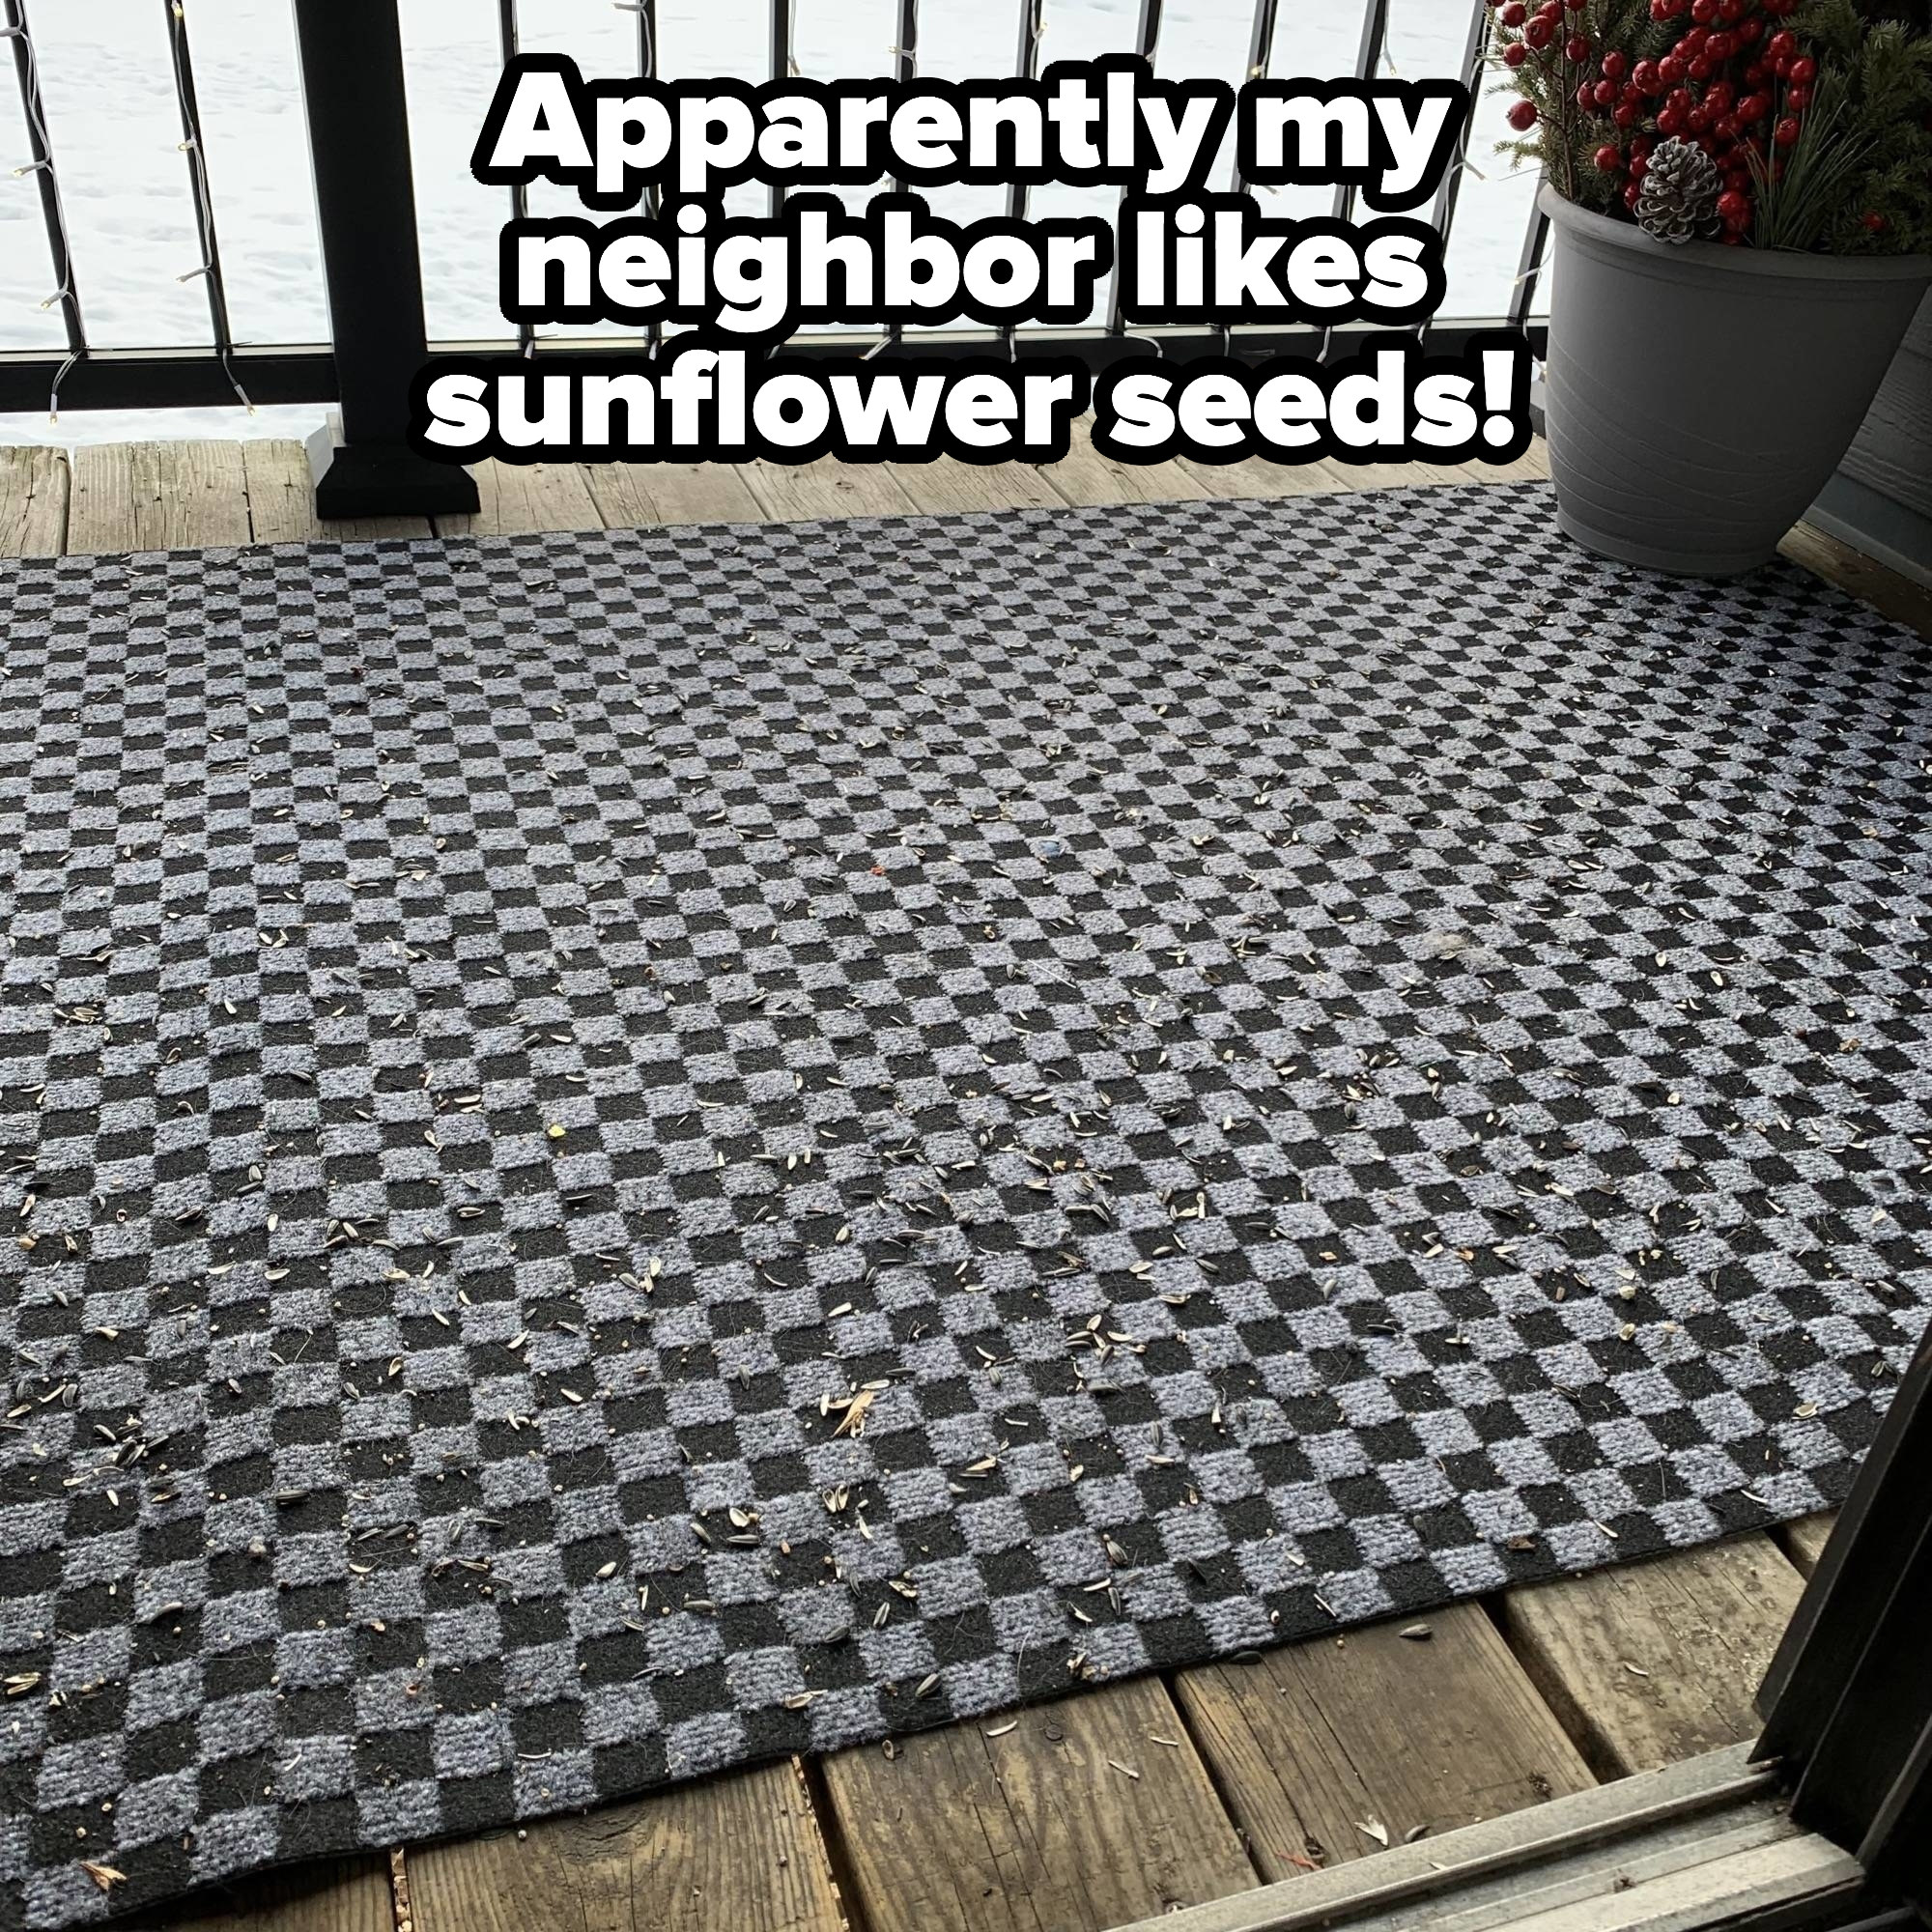 Sunflower seeds all over a person&#x27;s deck